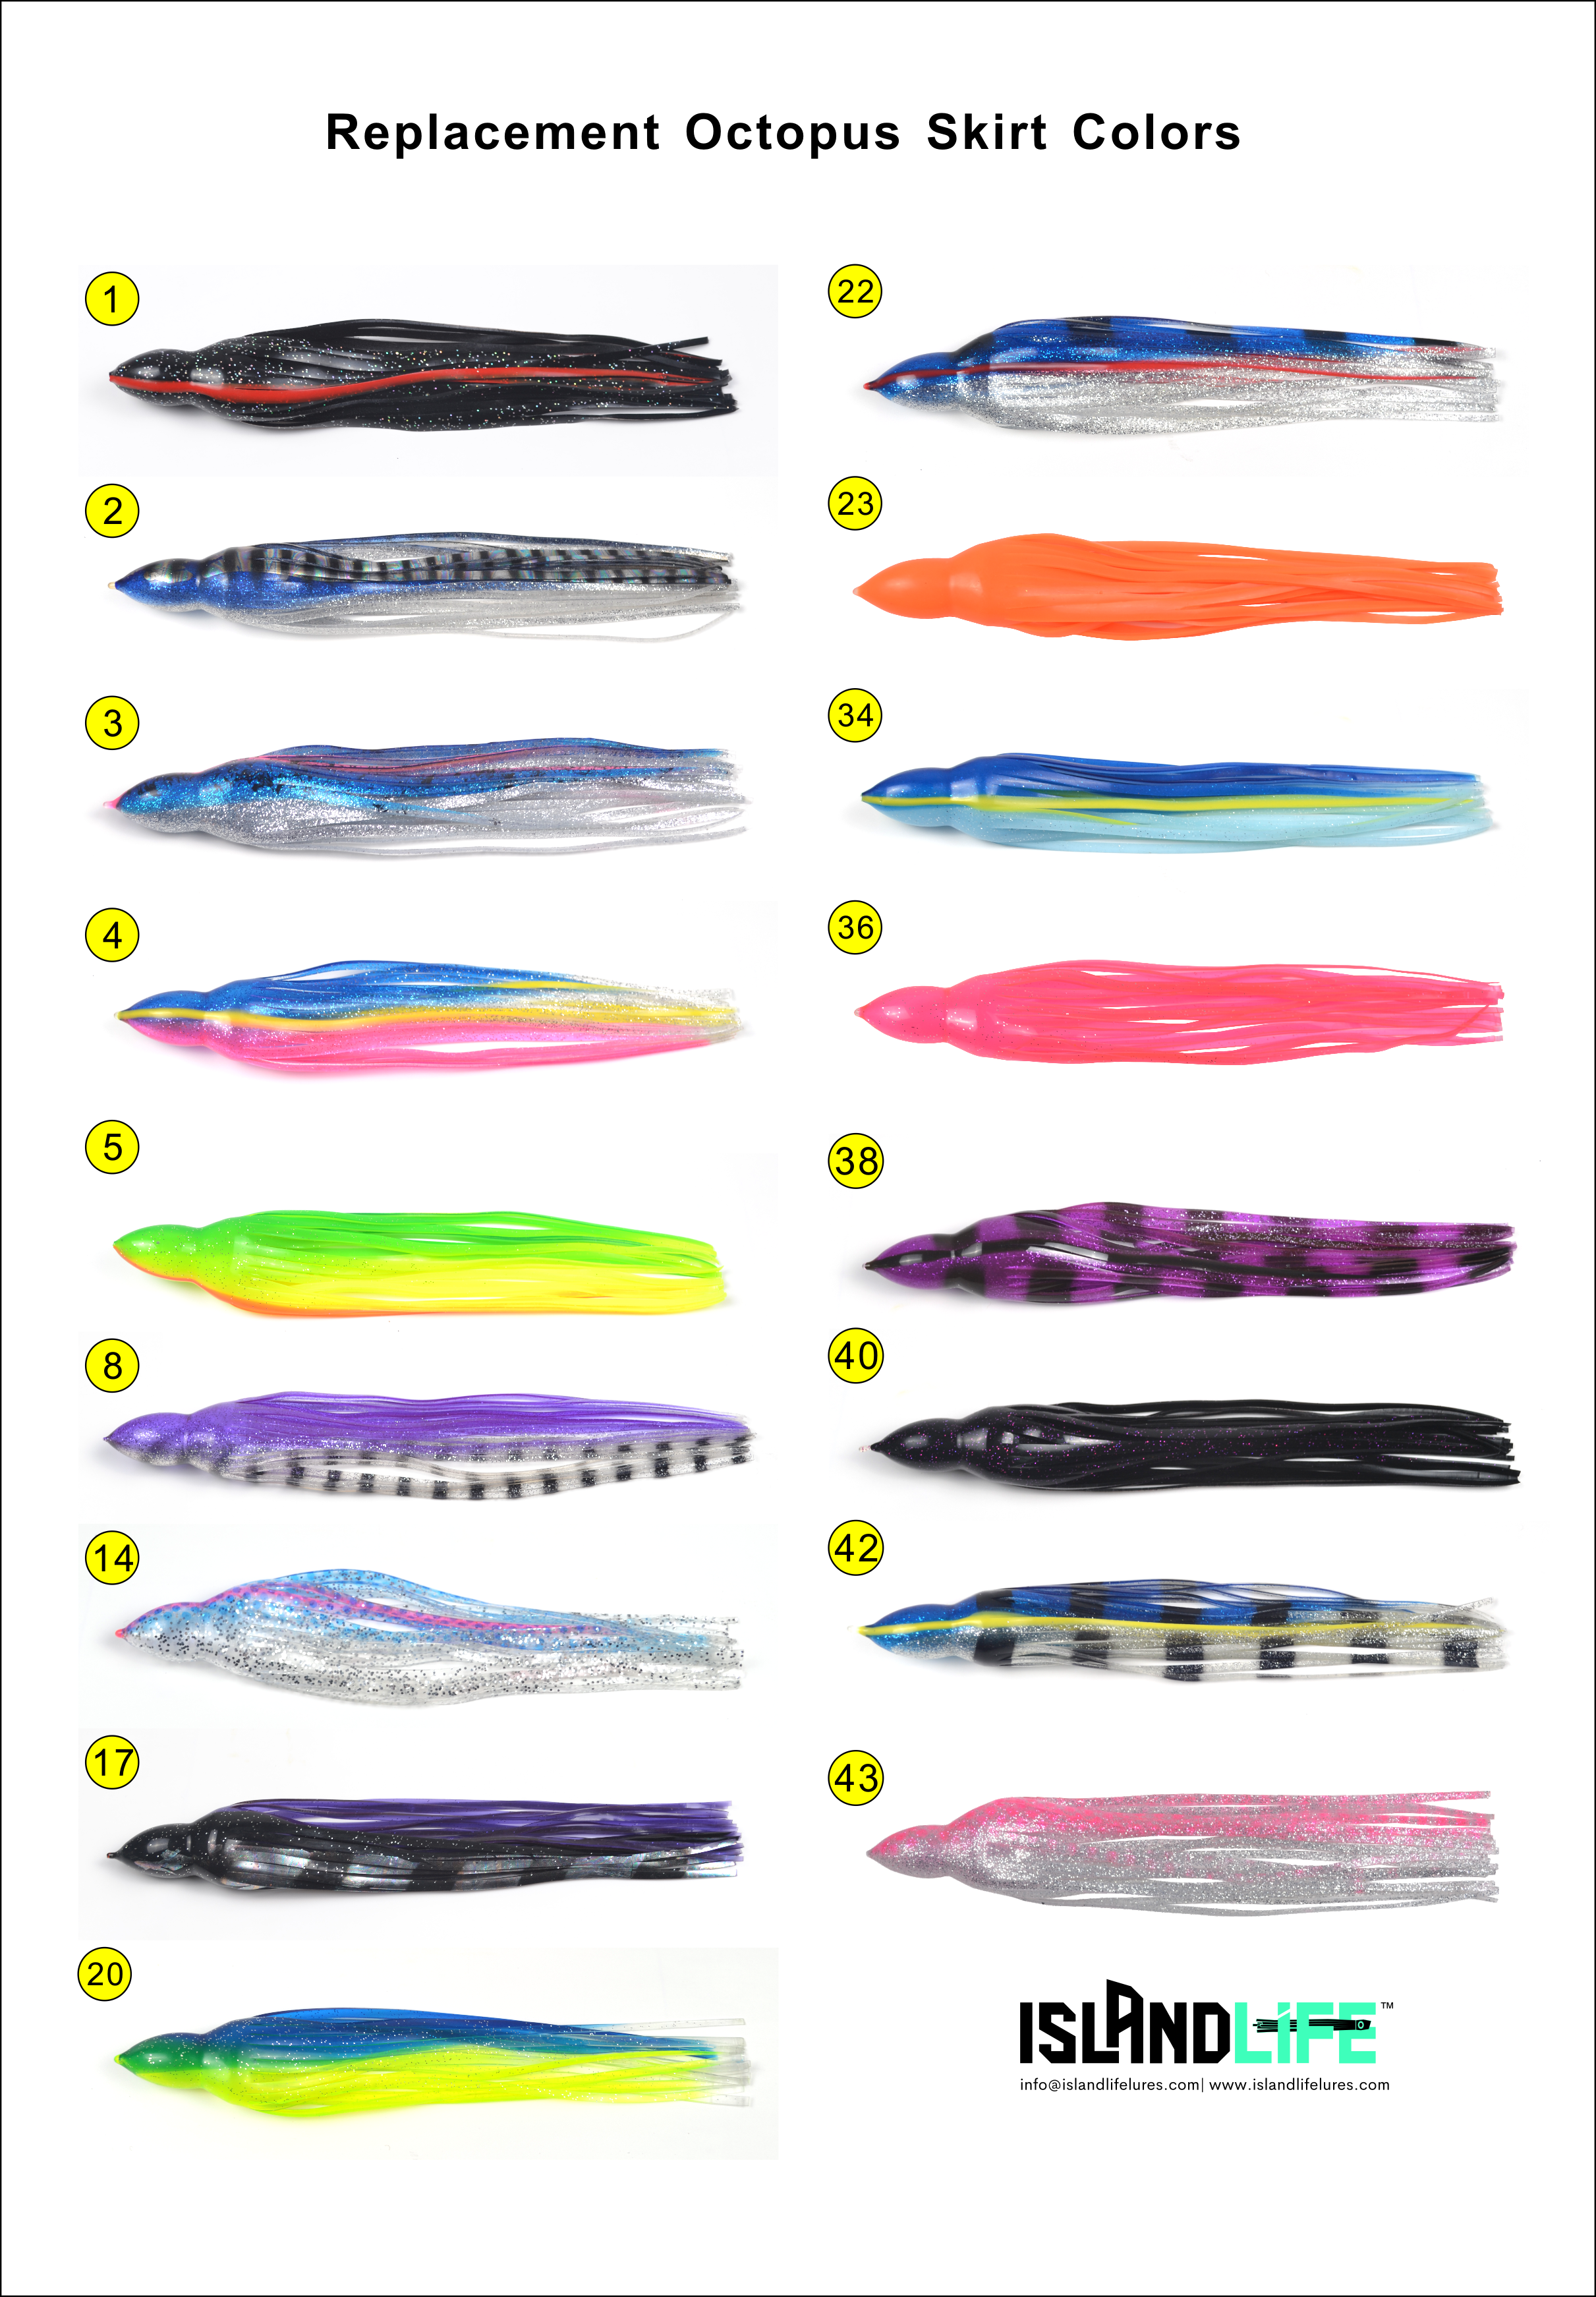 Replacement 8.5 skirts for lures - Island Life Lures